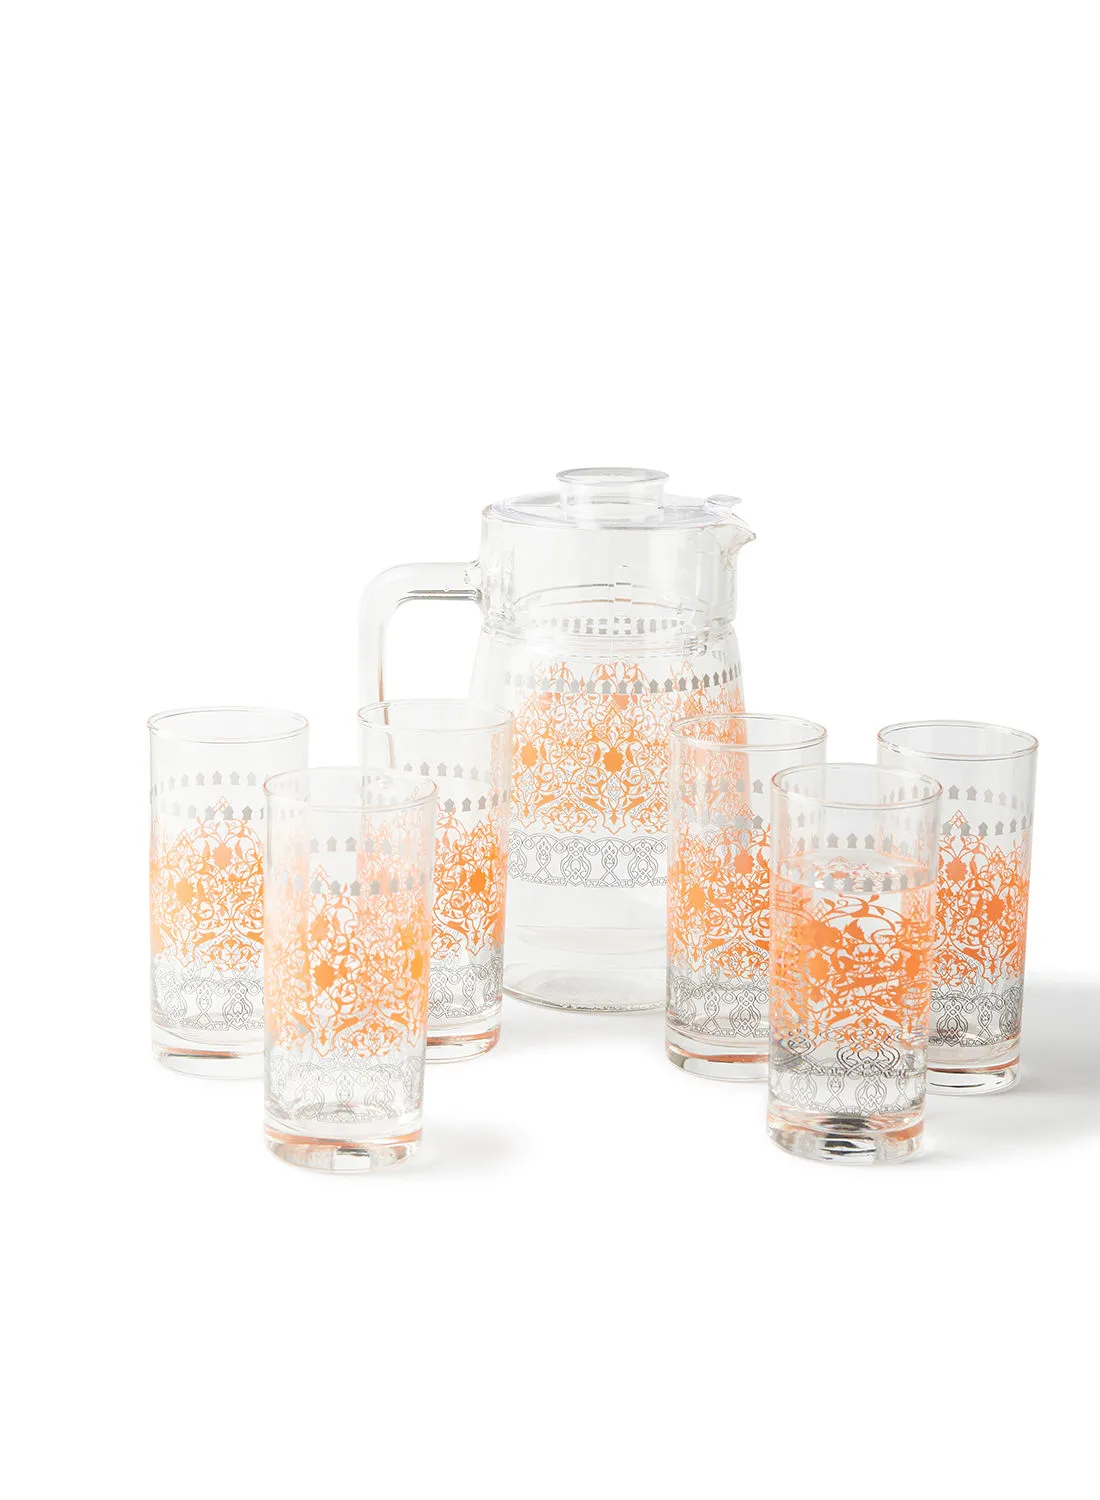 noon east 7 Piece Glass Drink Set Beverage Glasses For Juices - By Noon East - Jug 1.6 L, Tumblers 27 Cl - Serves 6 - Aura